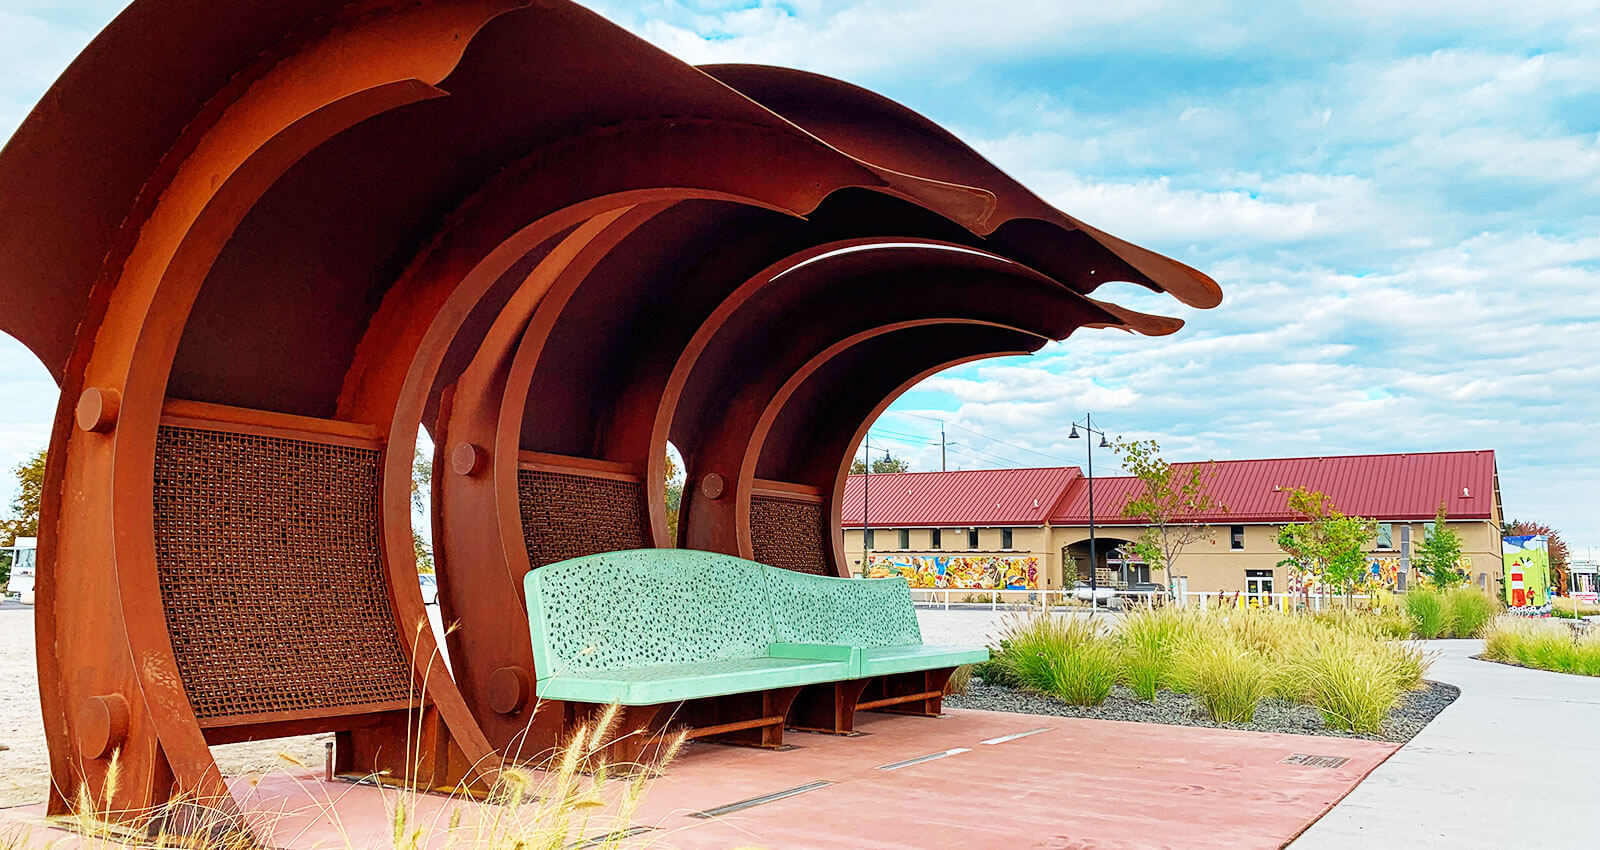 The Rolling Mass Bus Shelter sits in front of Columbia Gardens in Kennewick